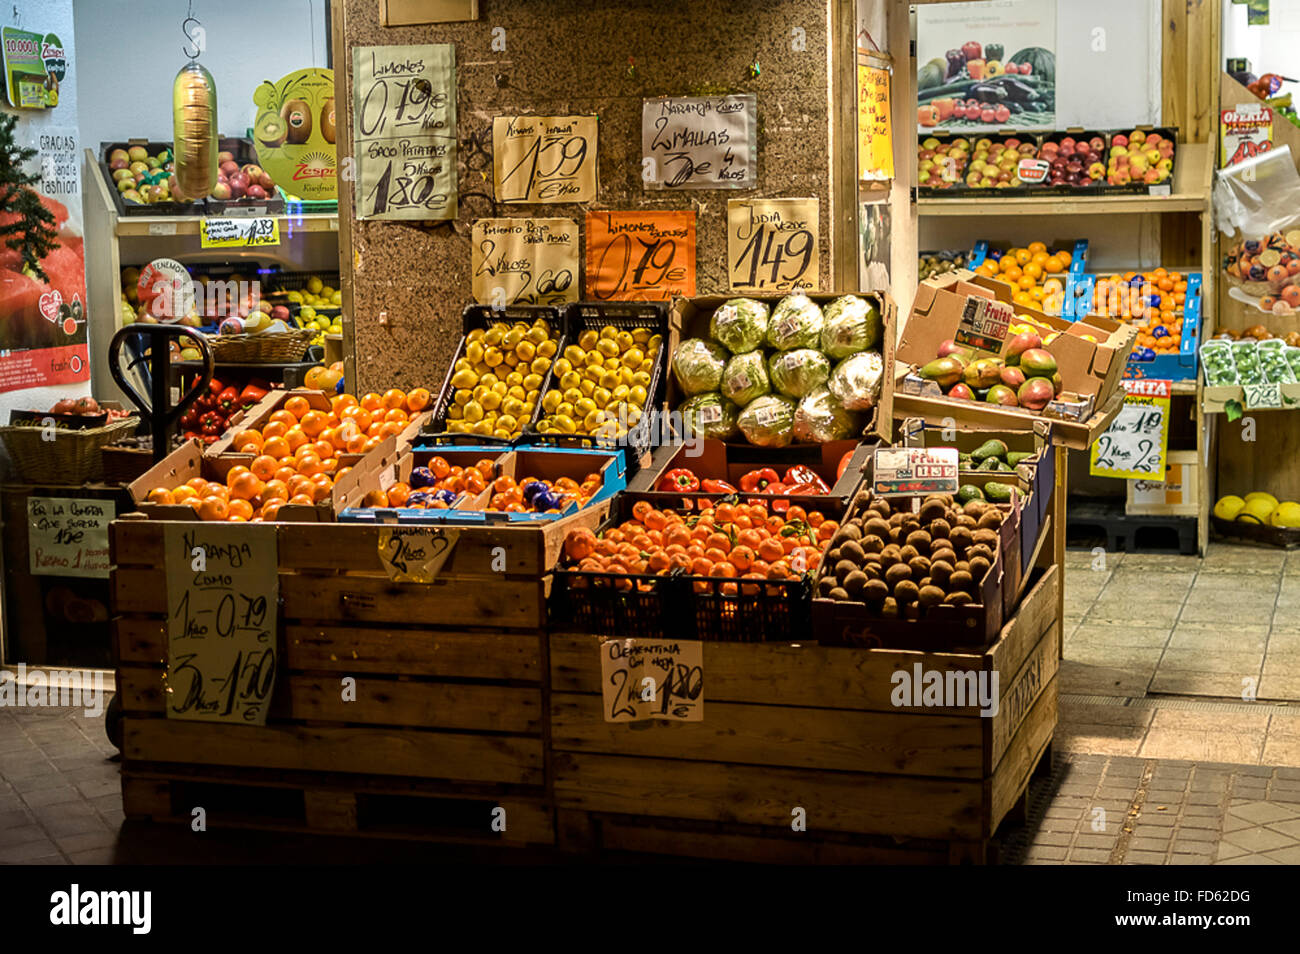 A fruit shop in Madrid city Stock Photo